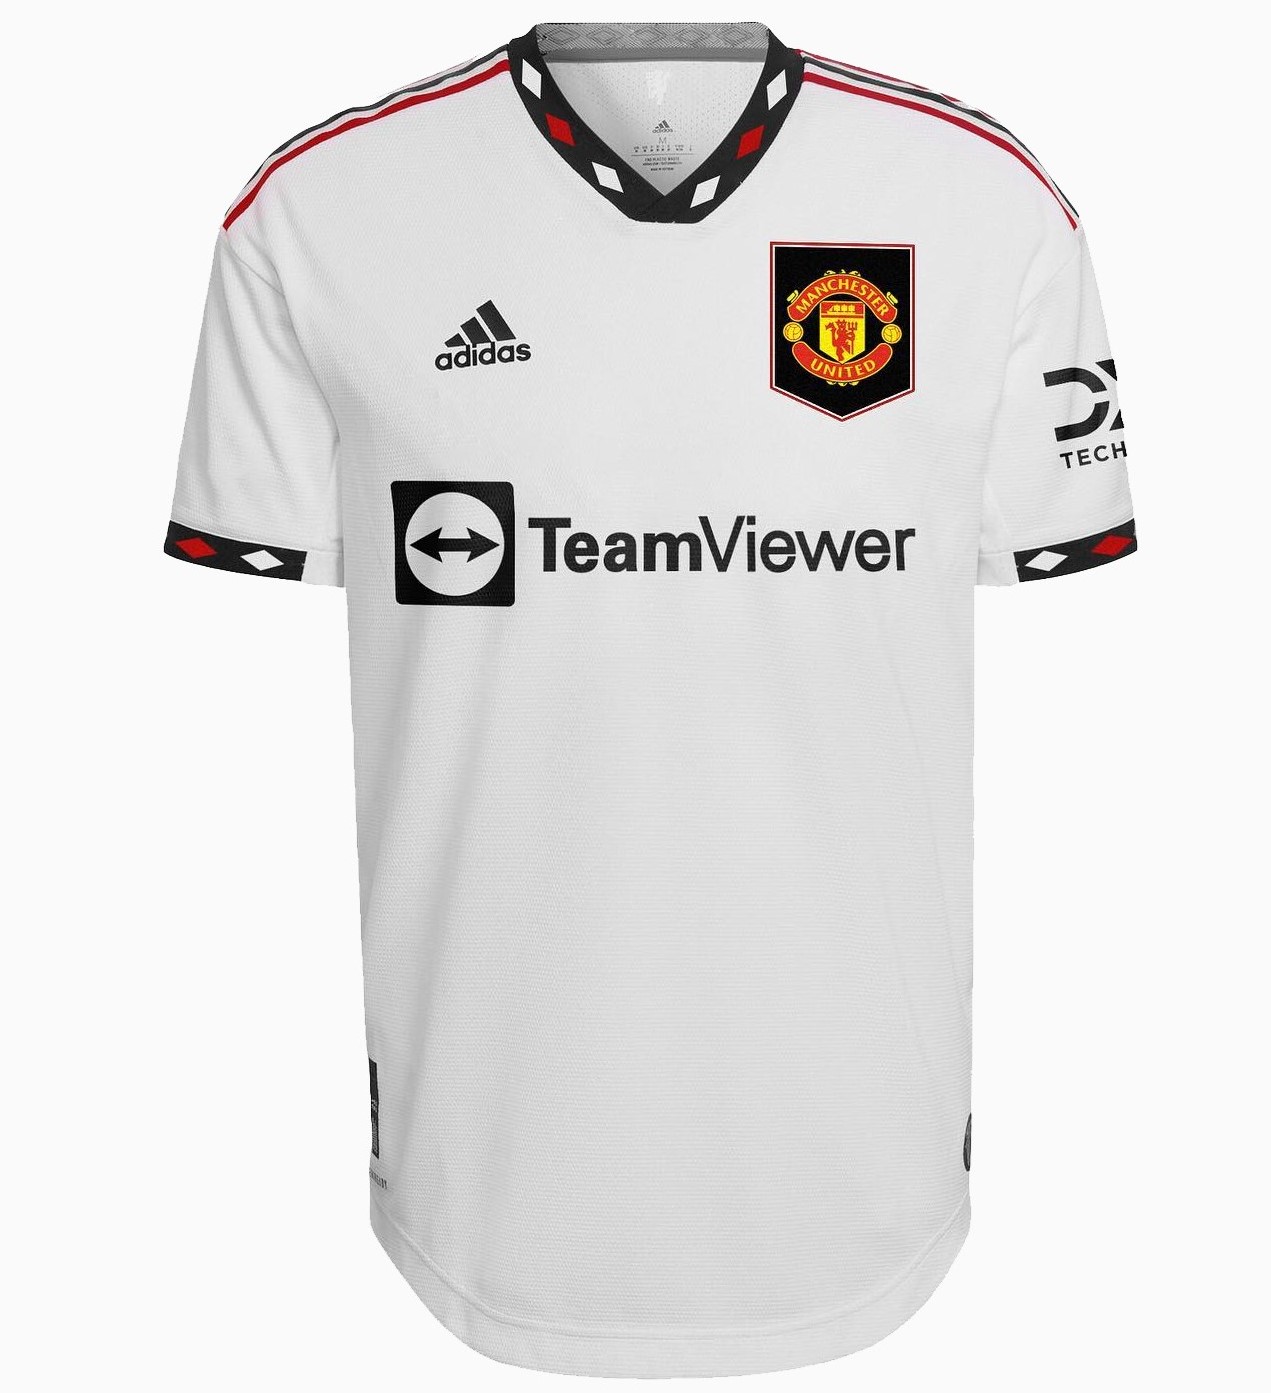 Latest 2022/23 kits you may have missed